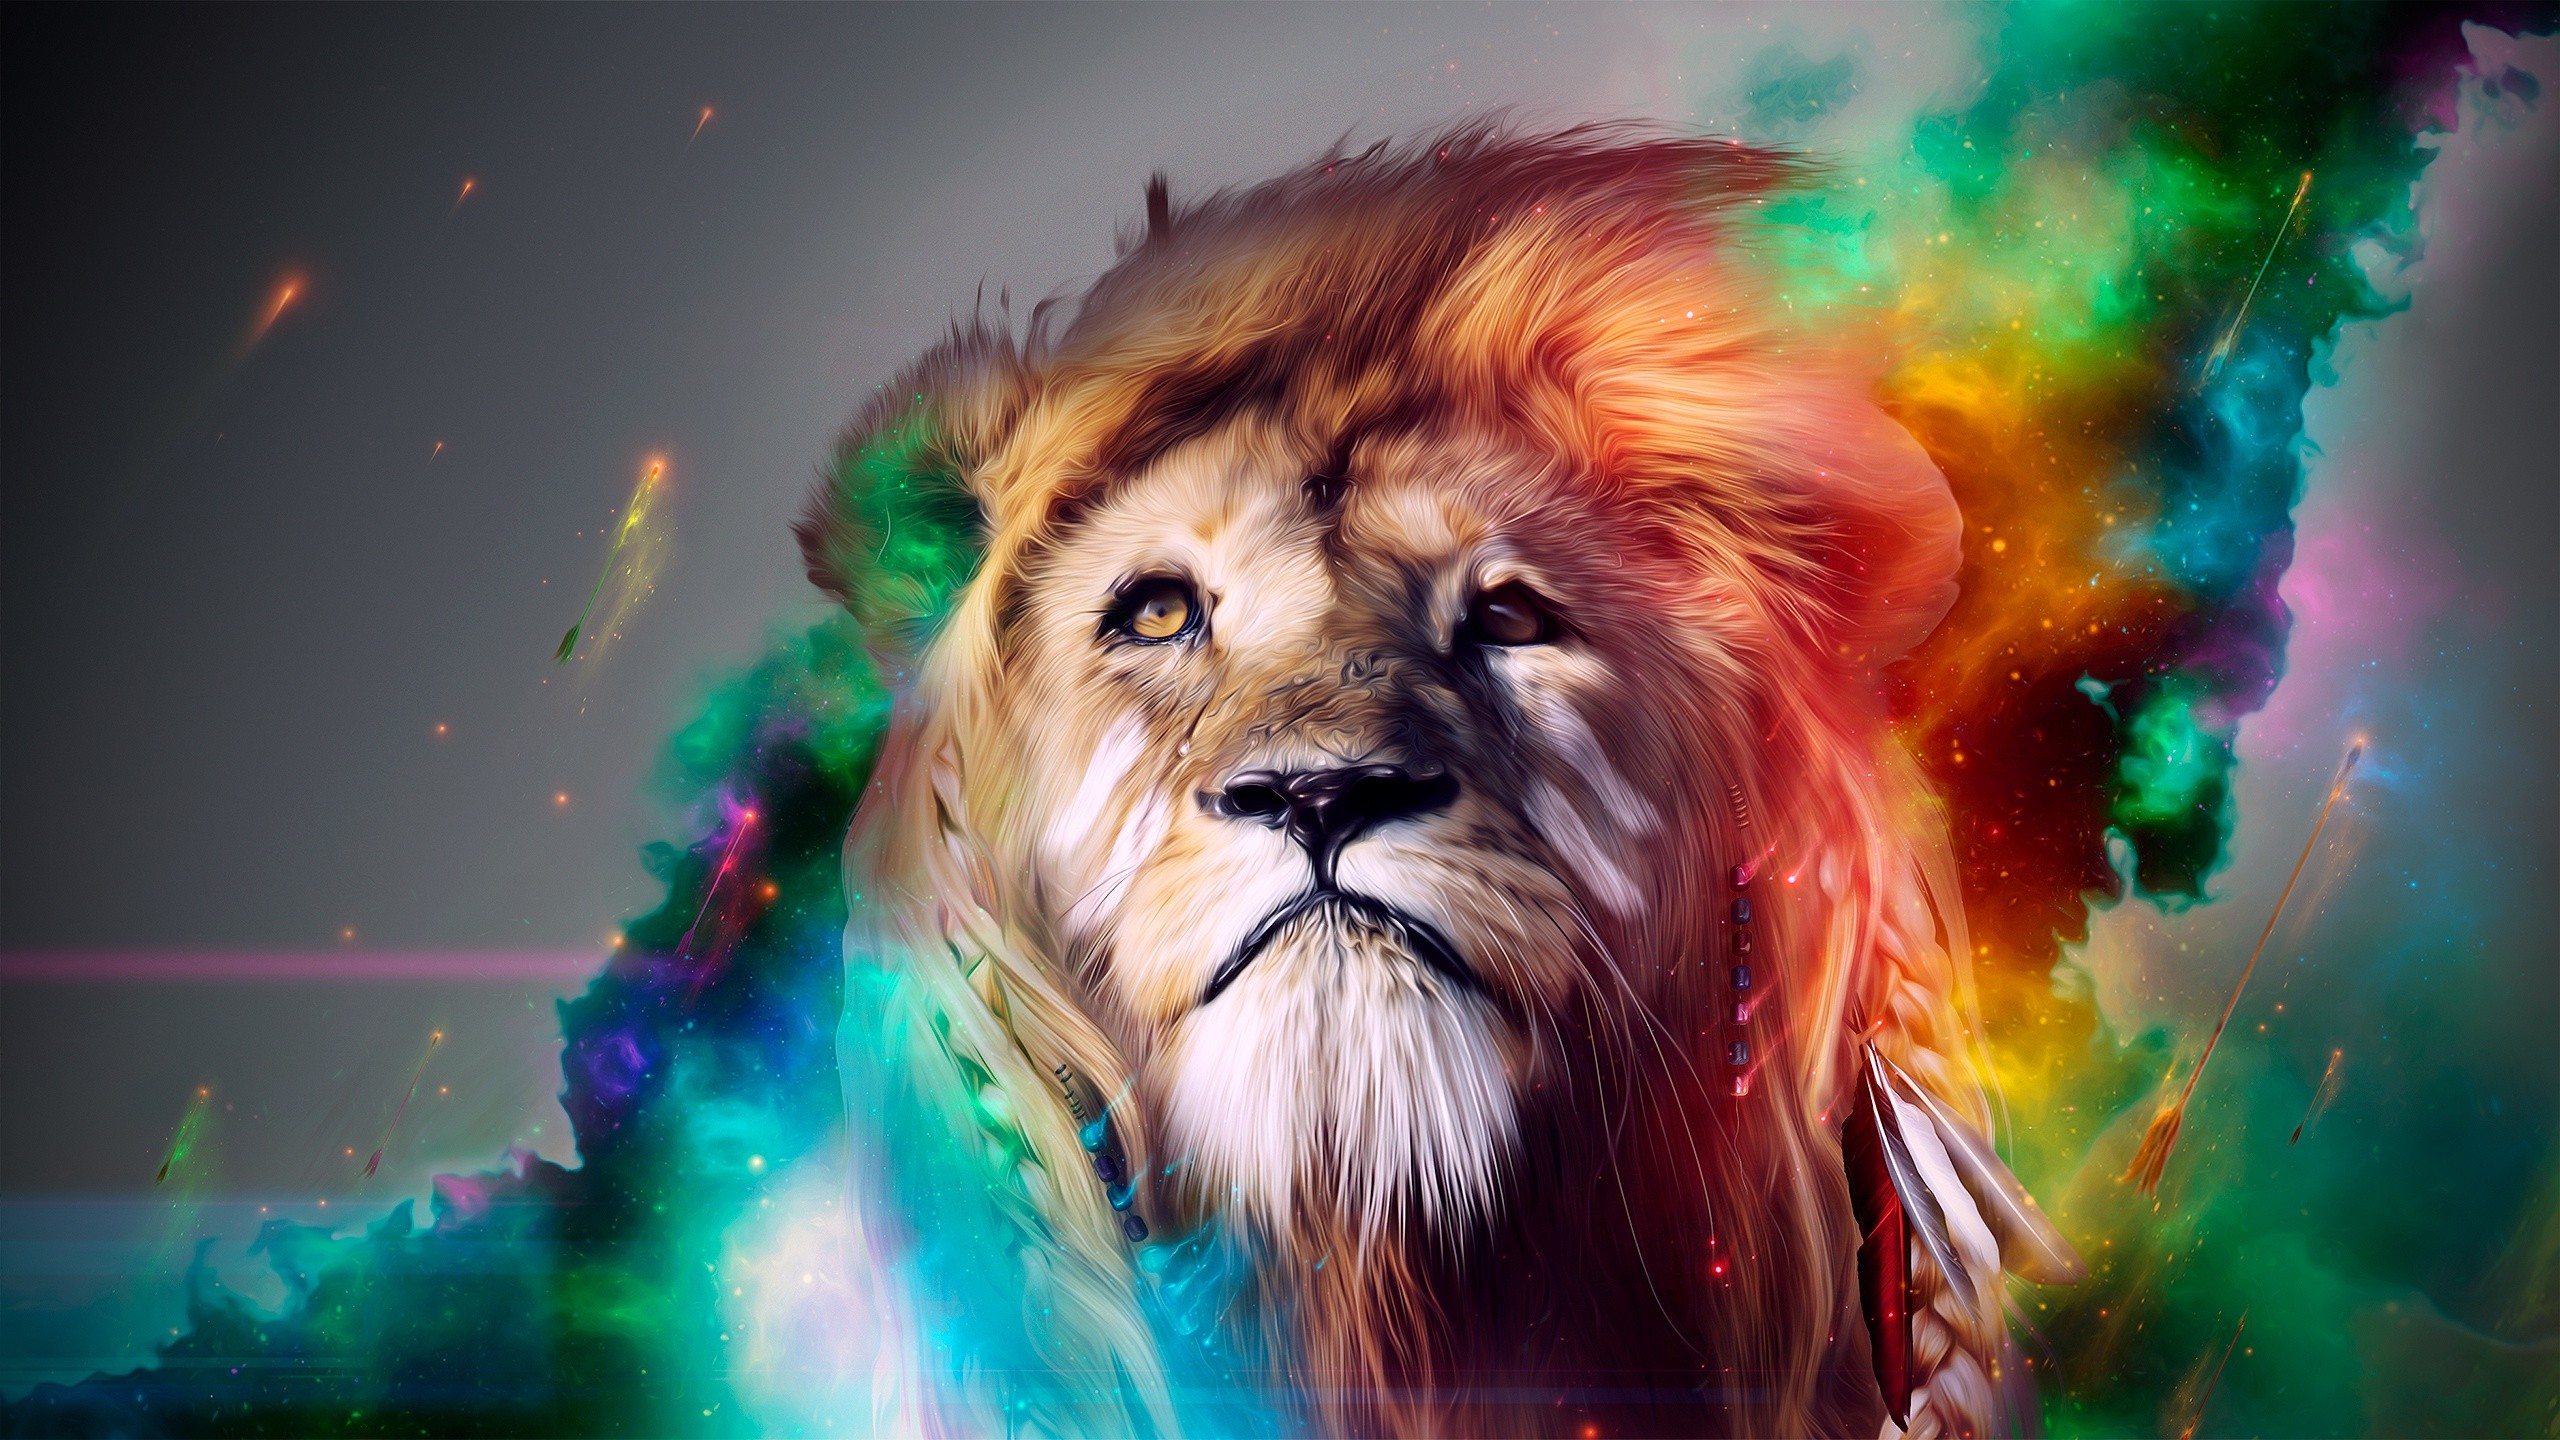 Lion hd papers and backgrounds